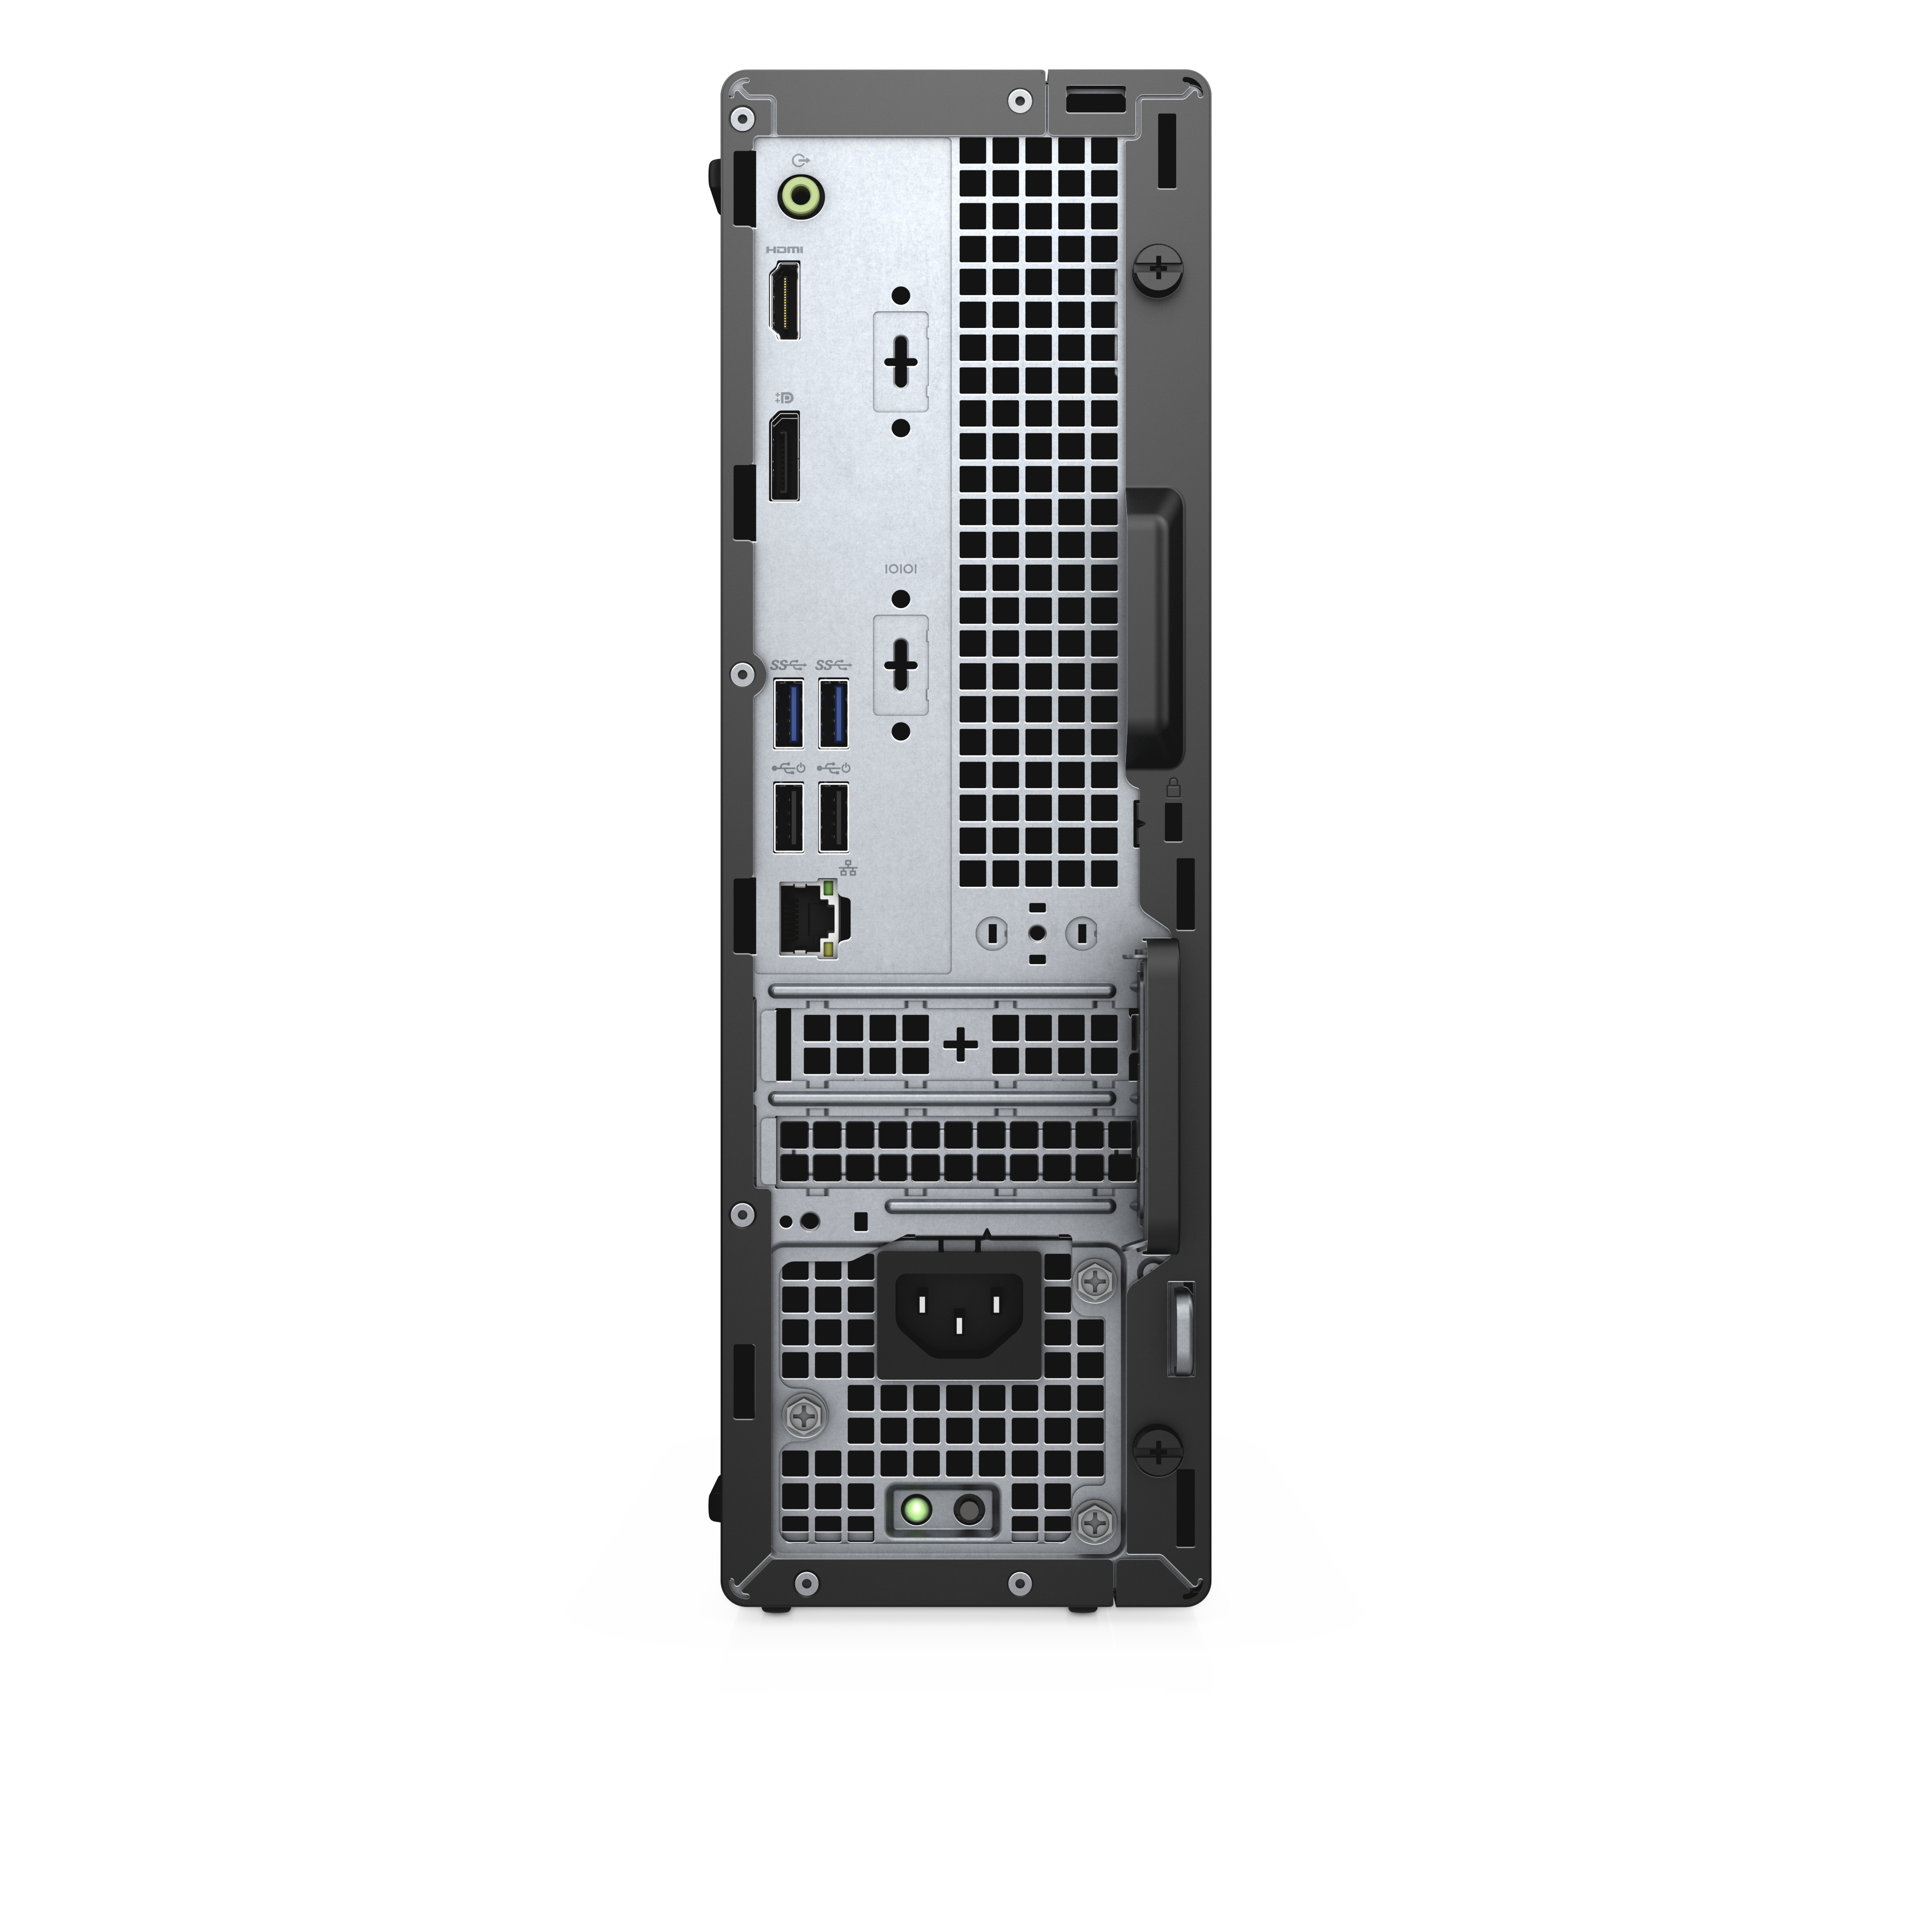 Optiplex 3080 Sff Core I5 10505 / 3.2 Ghz Ram 8 Gb Ssd 256 Gb Nvme, Class 35 Dvd-writer Uhd Graphics 630 Gige Win 10 Pro Monitor: None Keyboard: English Black Bts With 3 - image 4 of 4